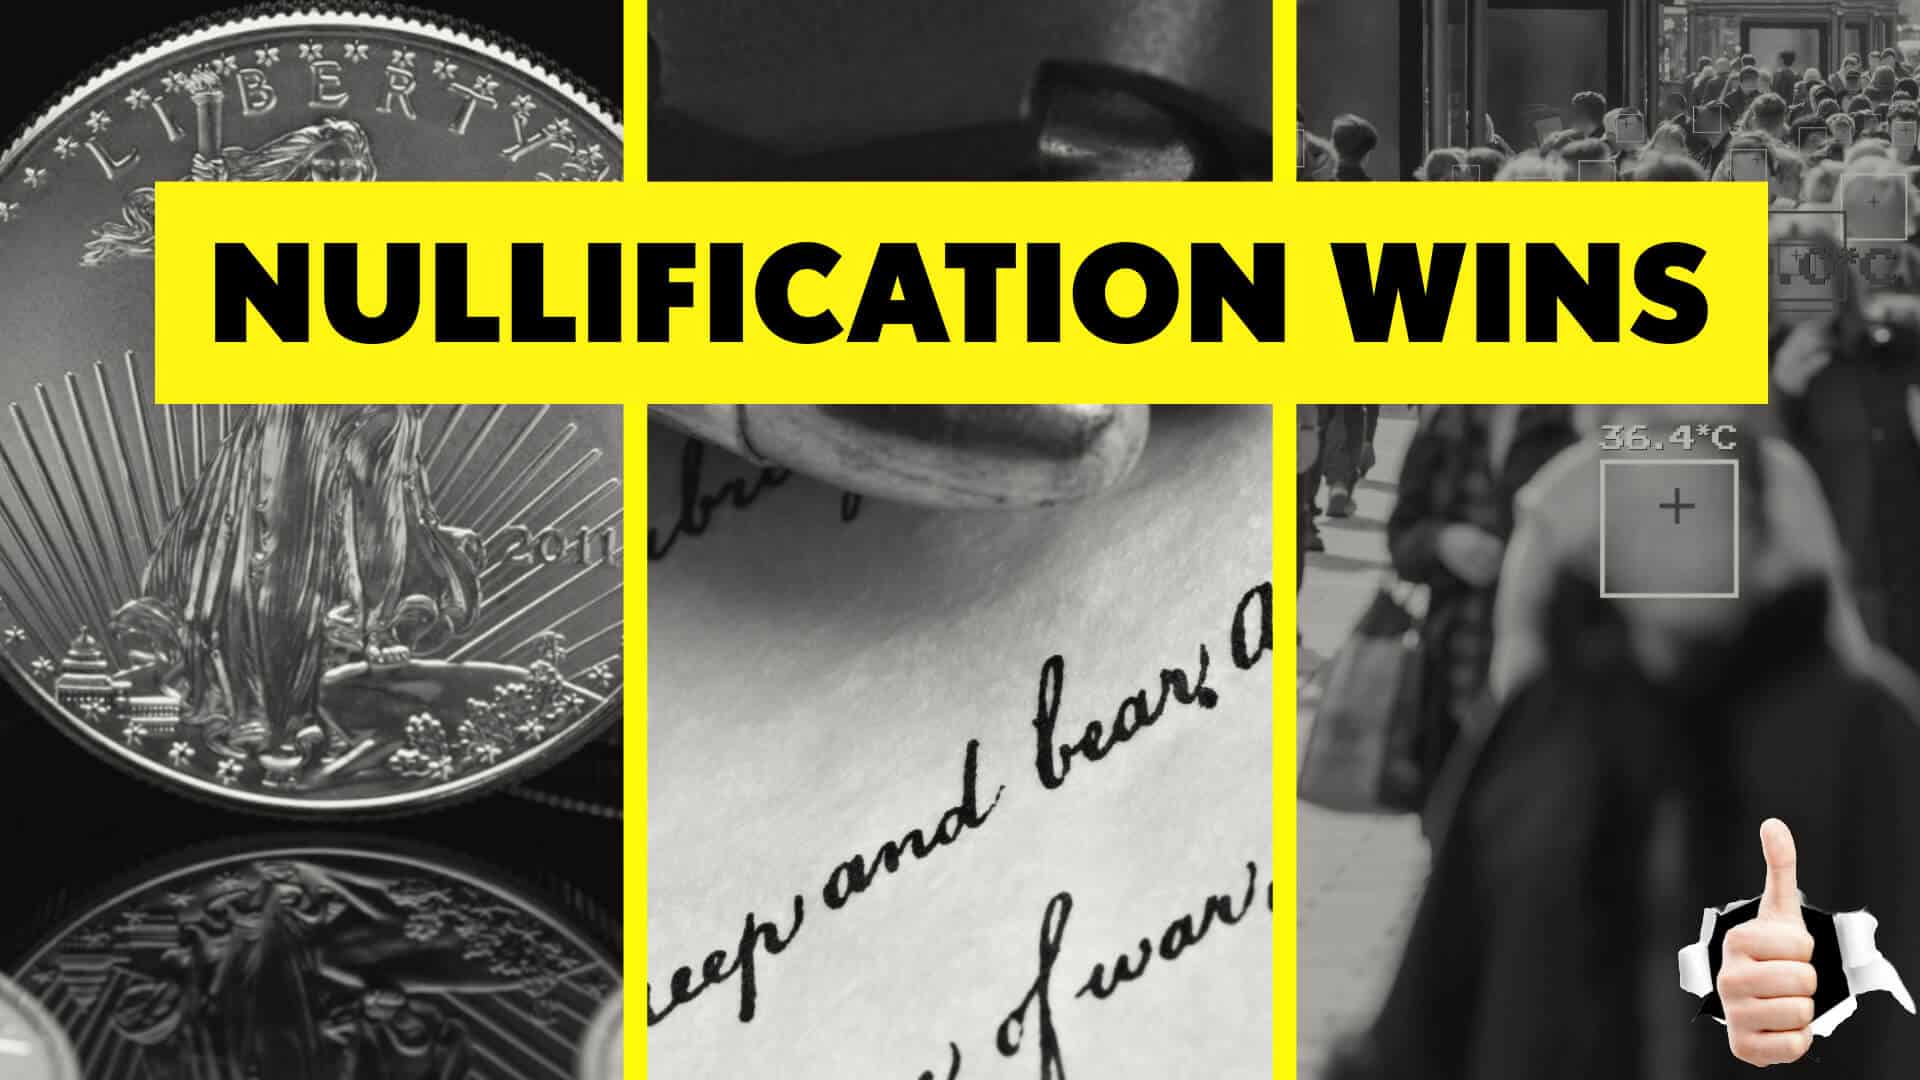 Nullification News: Key Wins on Sound Money, Firearms and Privacy